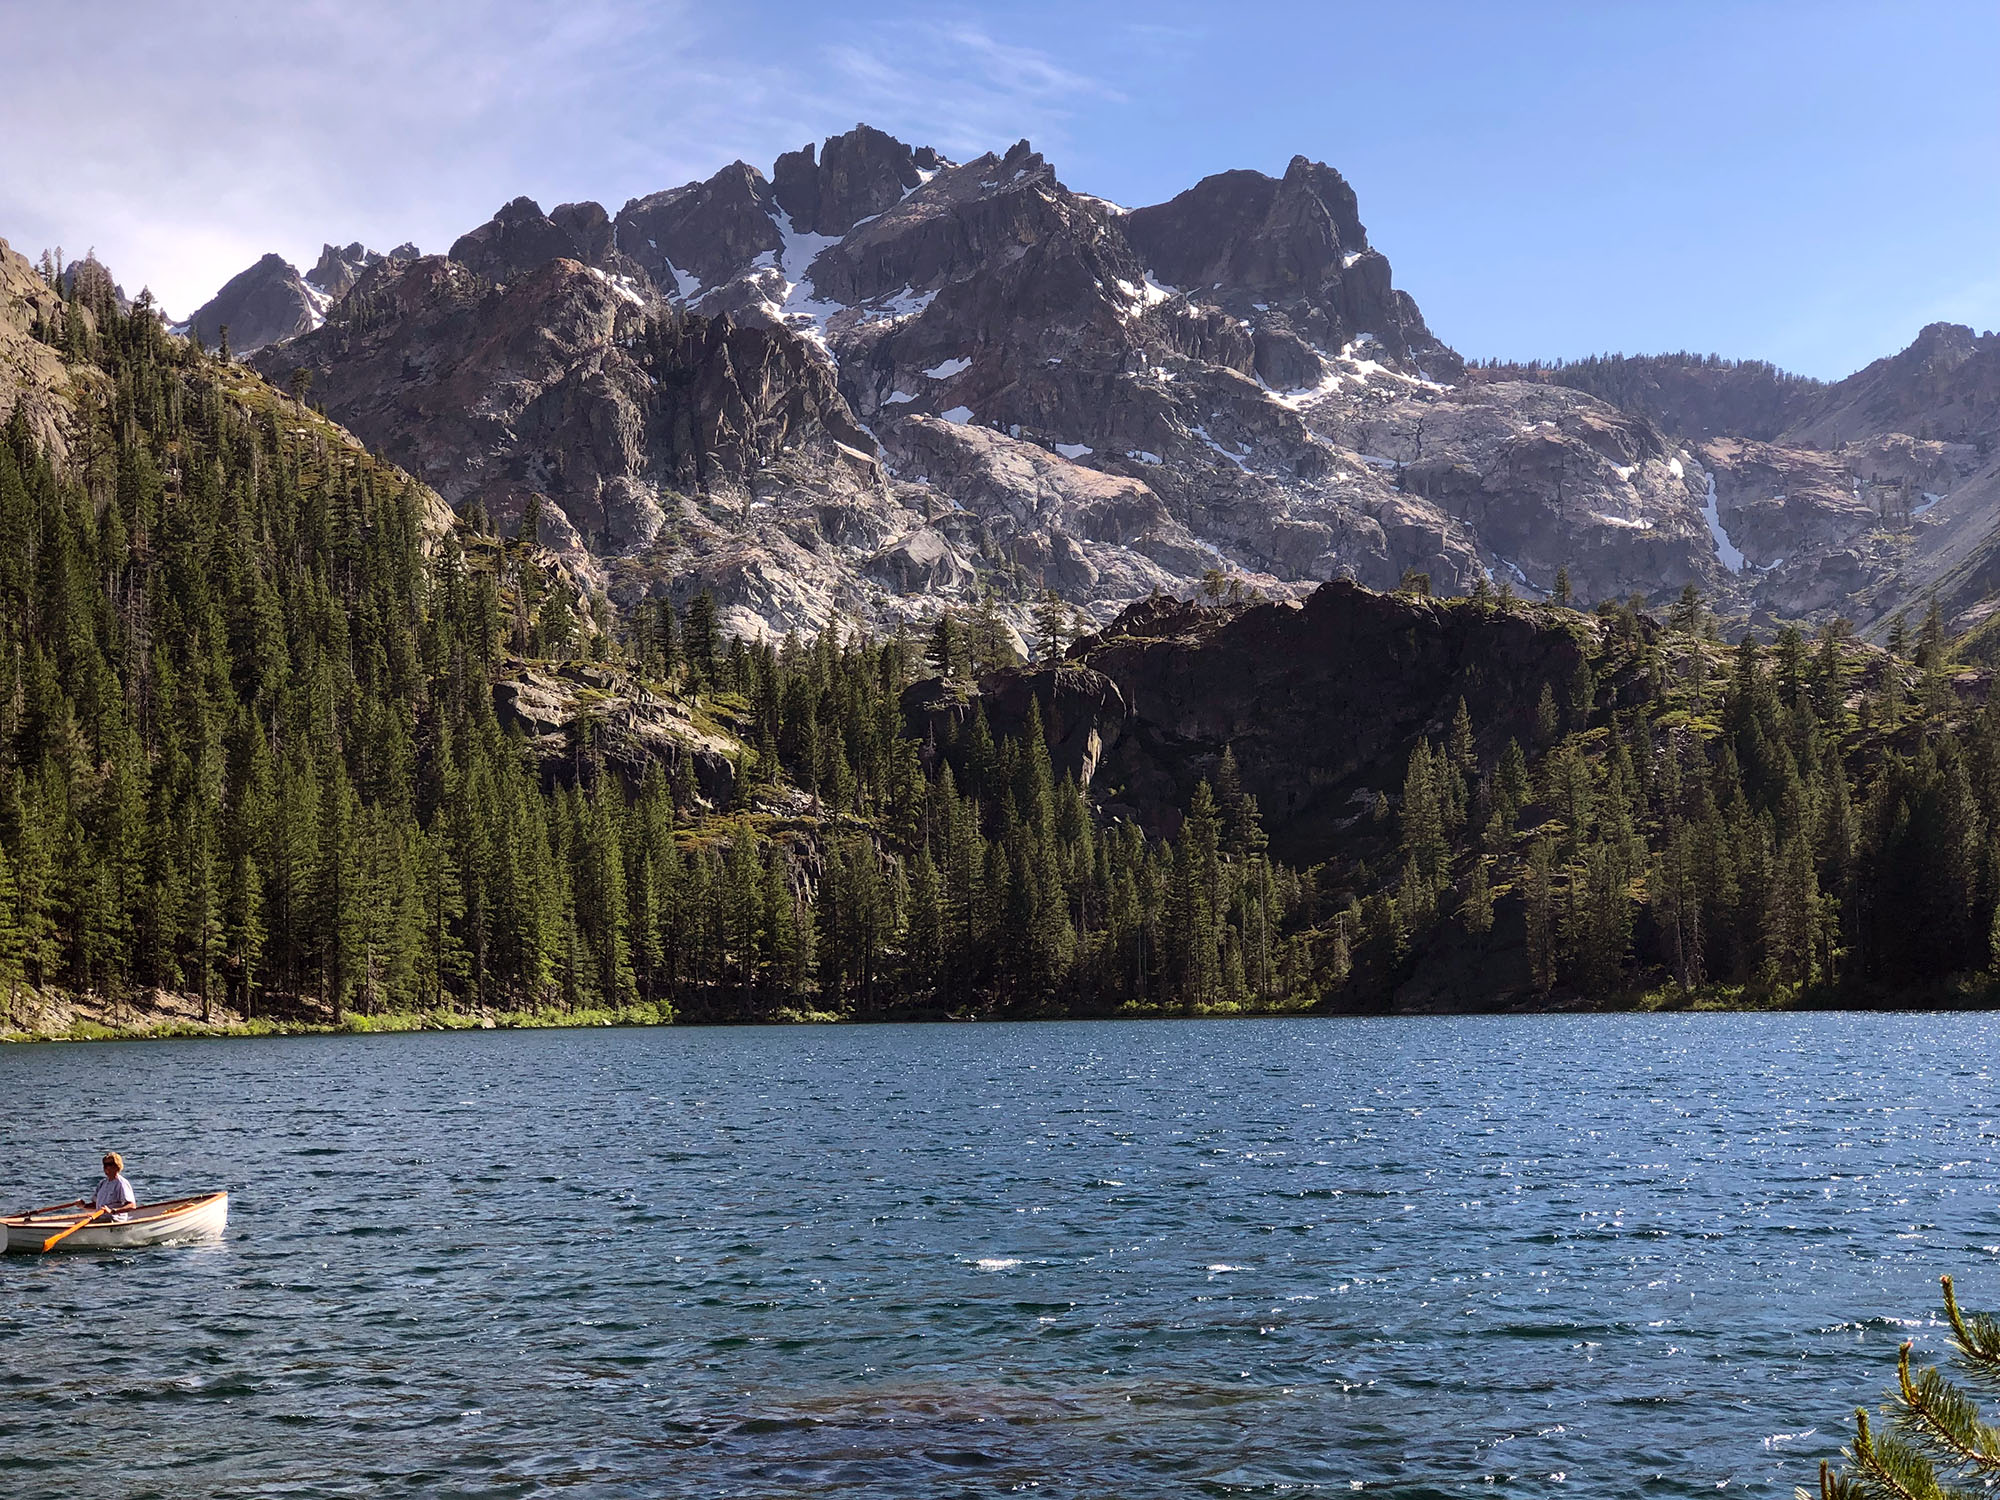 View of a lake and mountains near Lakes Basin, CA